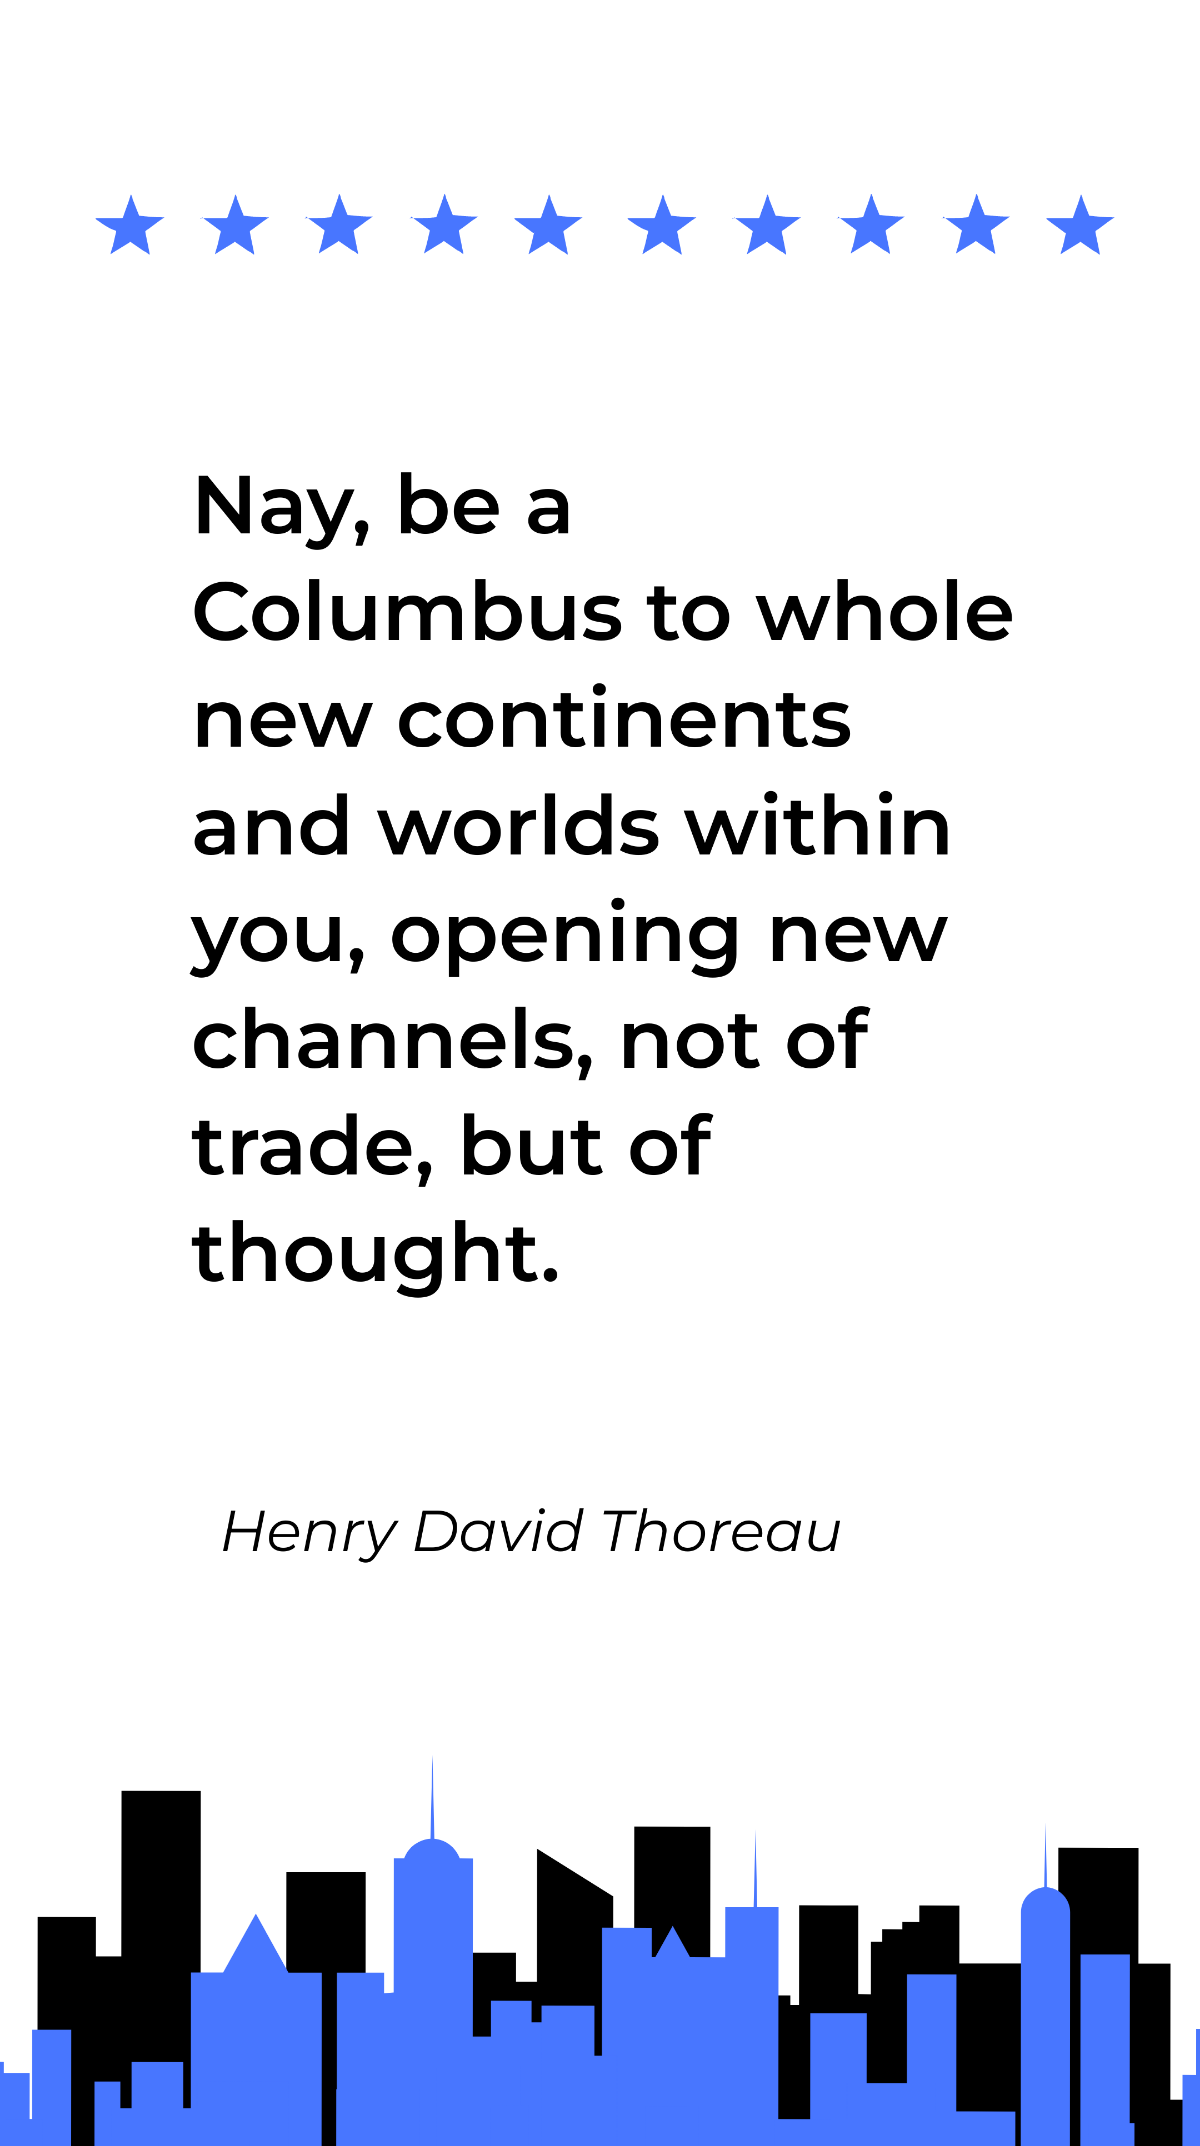 Henry David Thoreau- Nay, be a Columbus to whole new continents and worlds within you, opening new channels, not of trade, but of thought. Template